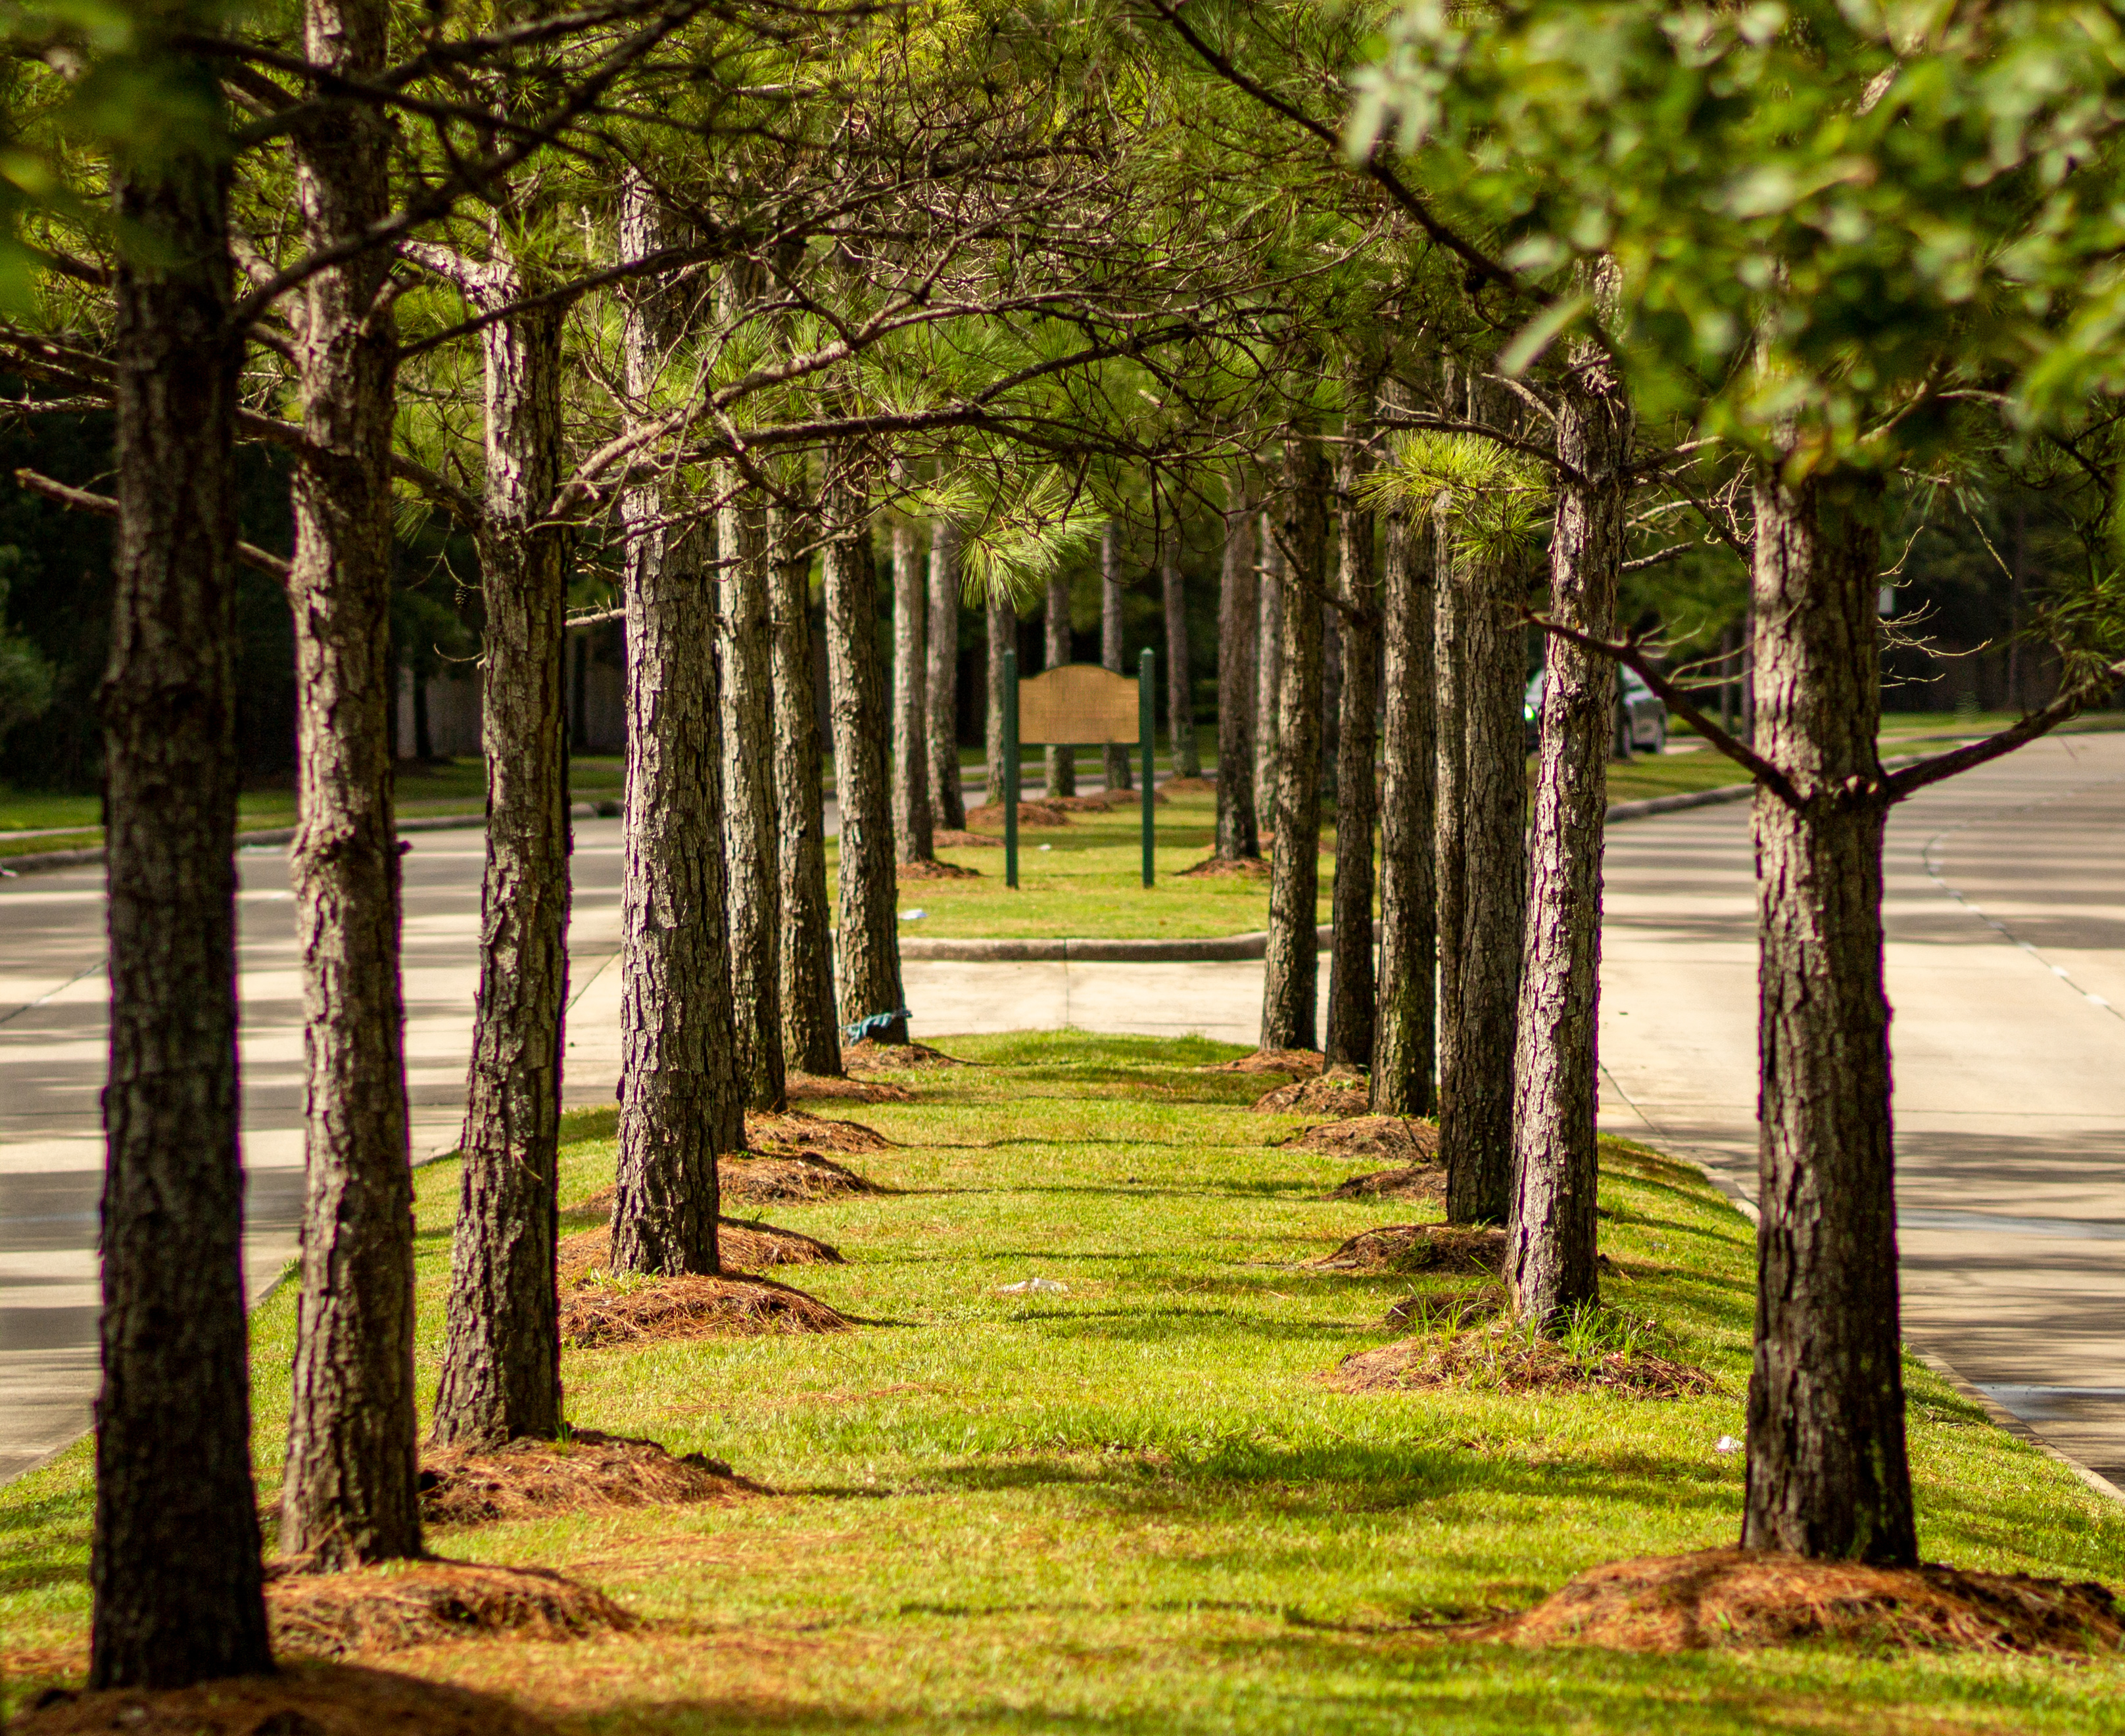 Double row of pine trees forming a shaded lane